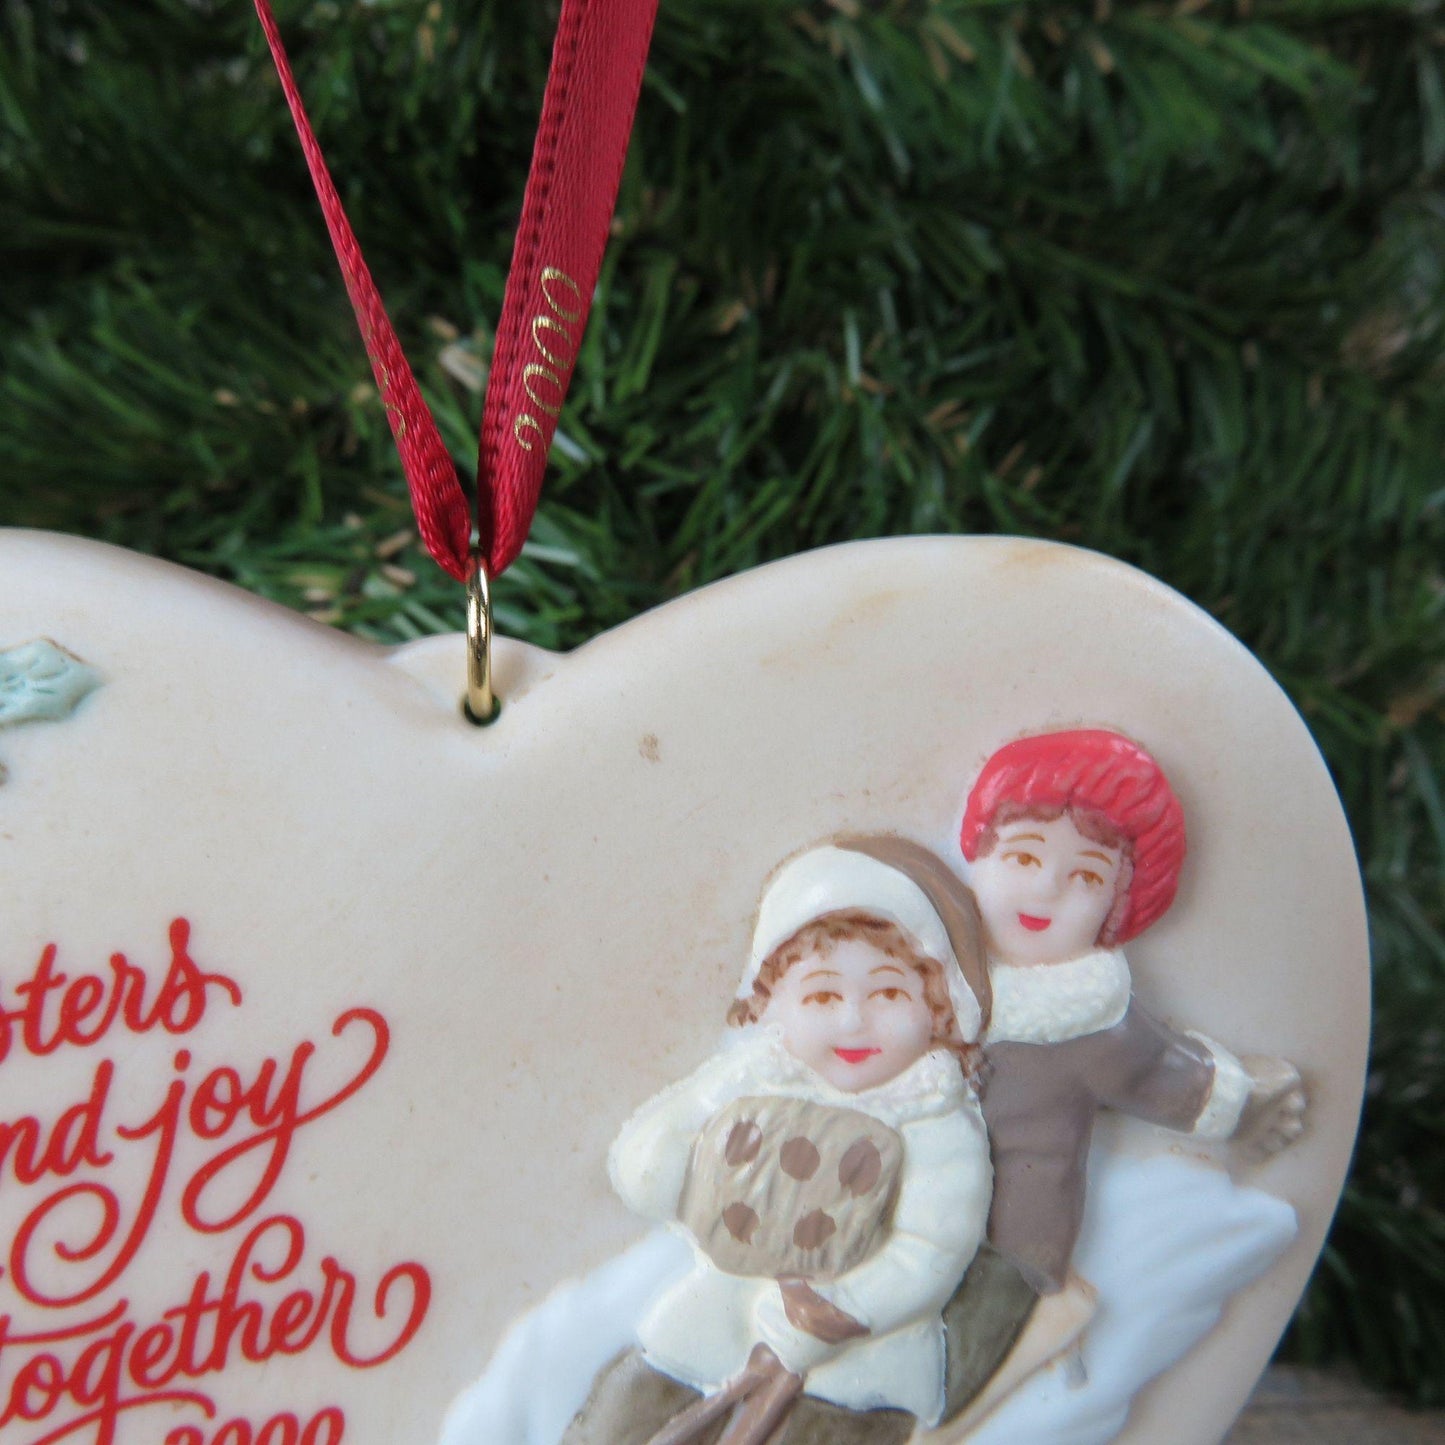 Vintage Sister to Sister Ornament Sisters and Joy Go Together Hallmark Plaque 2000